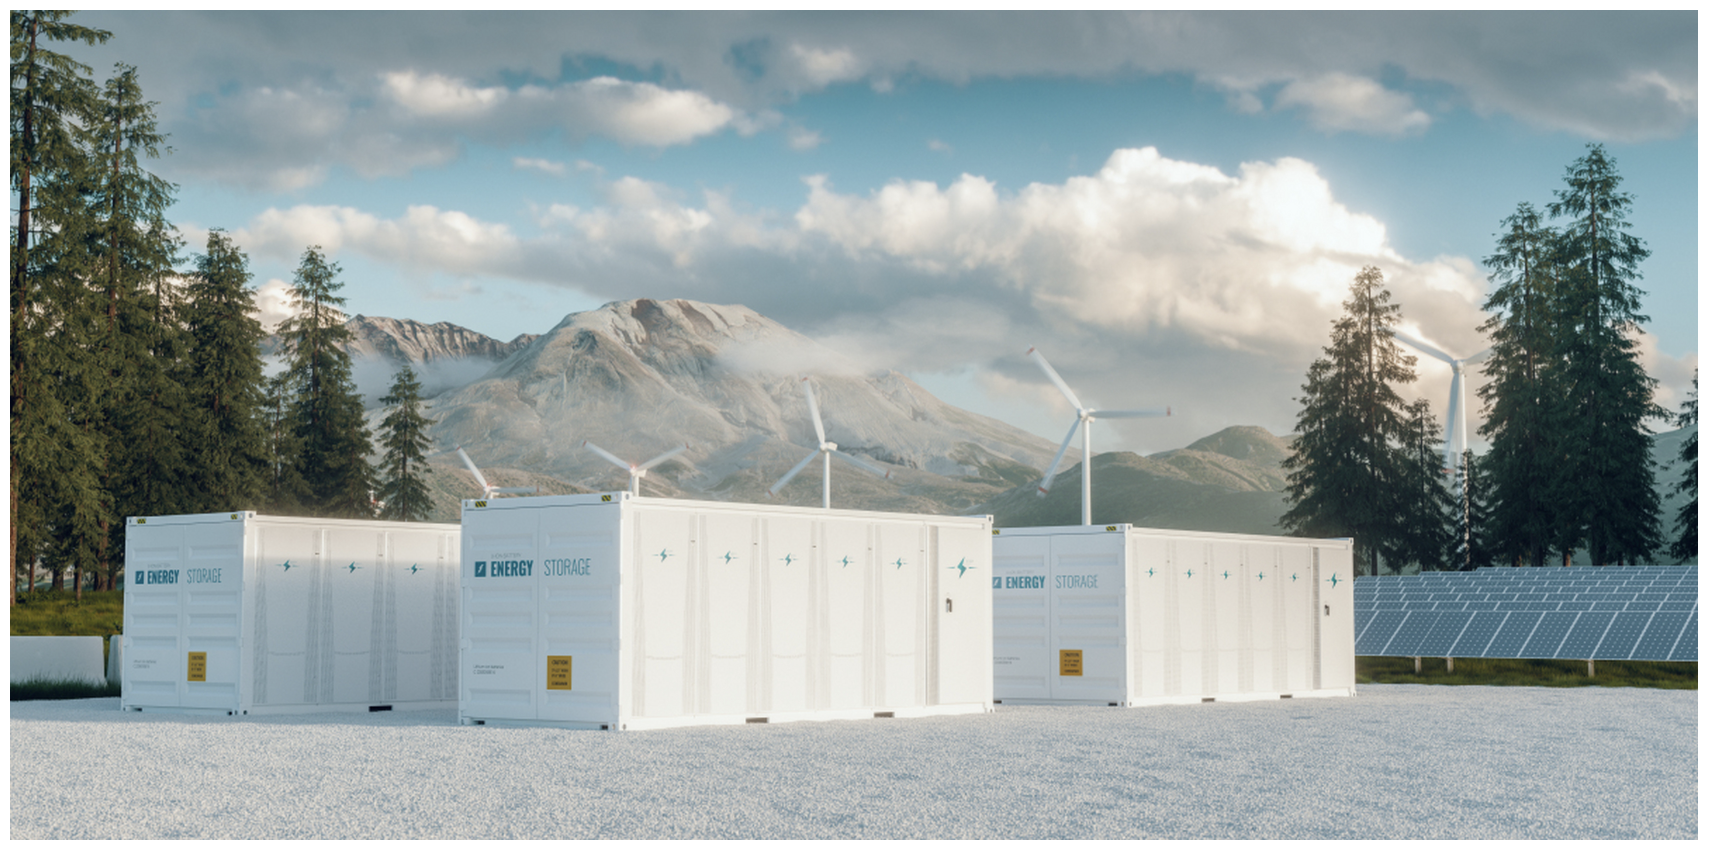 Commercial energy storage